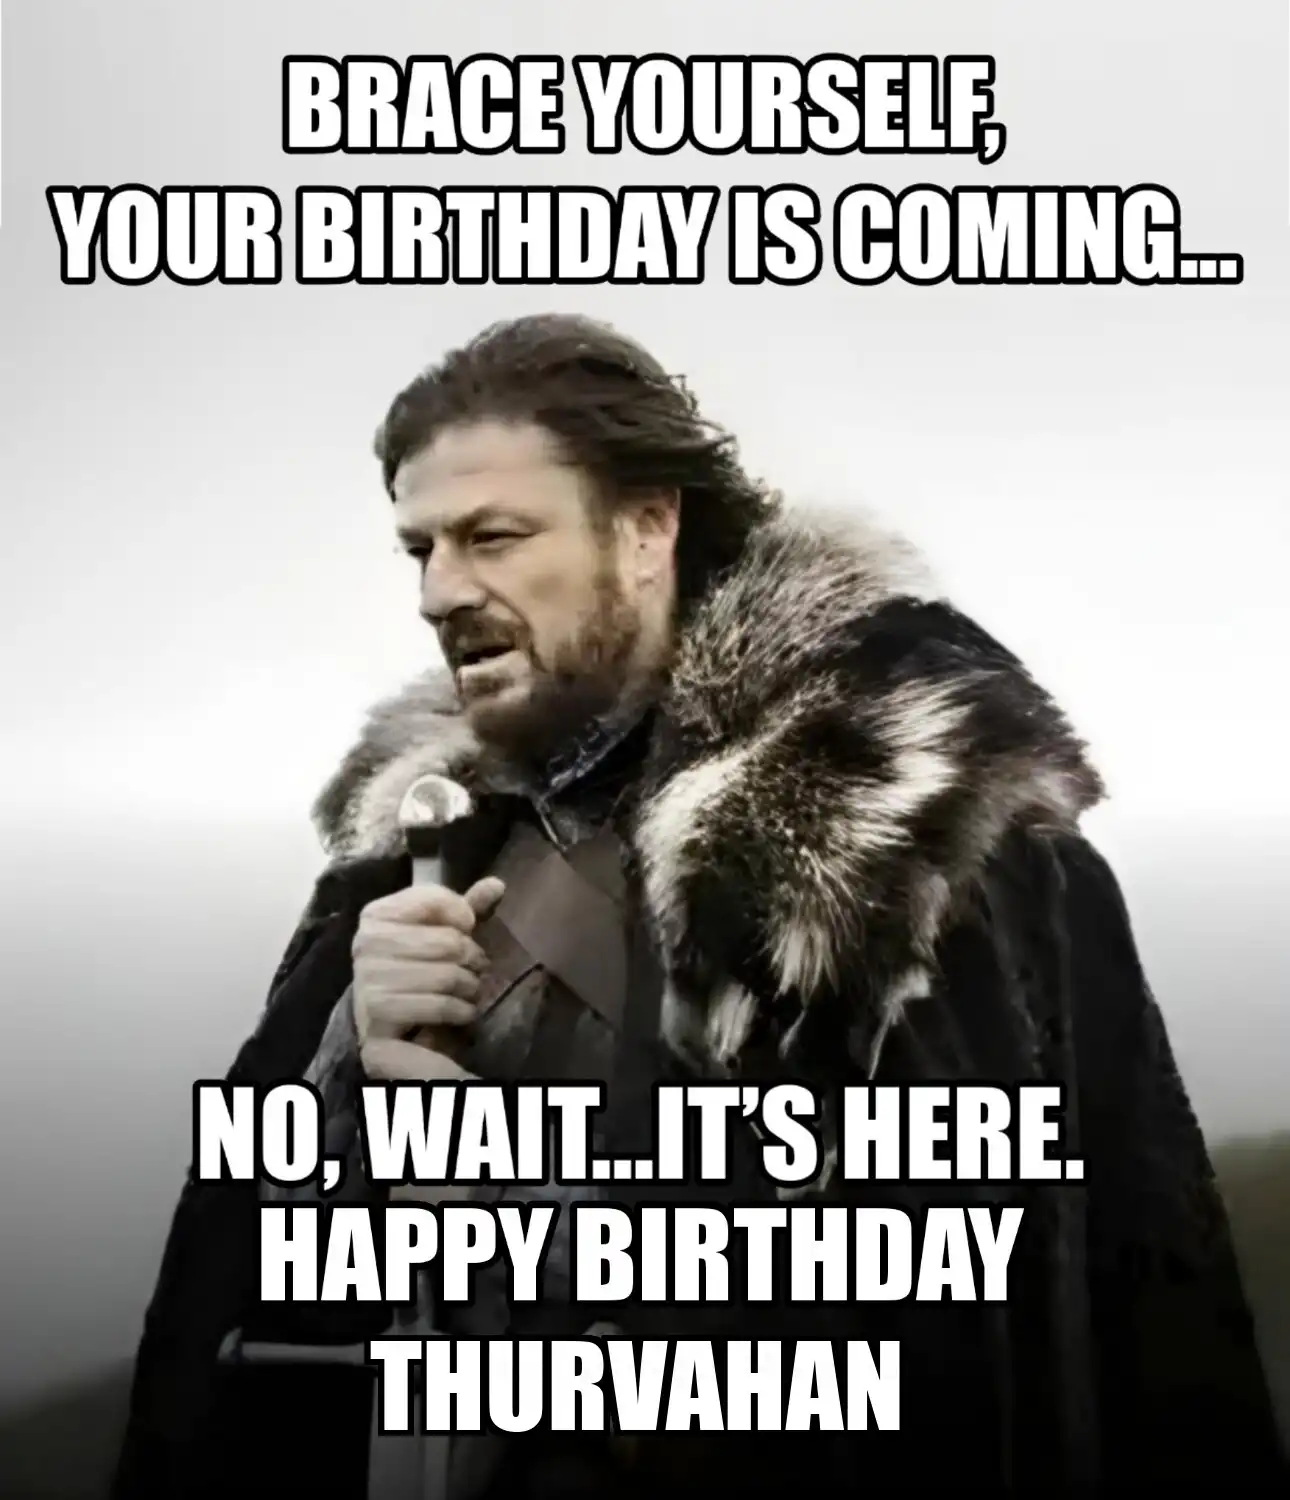 Happy Birthday Thurvahan Brace Yourself Your Birthday Is Coming Meme